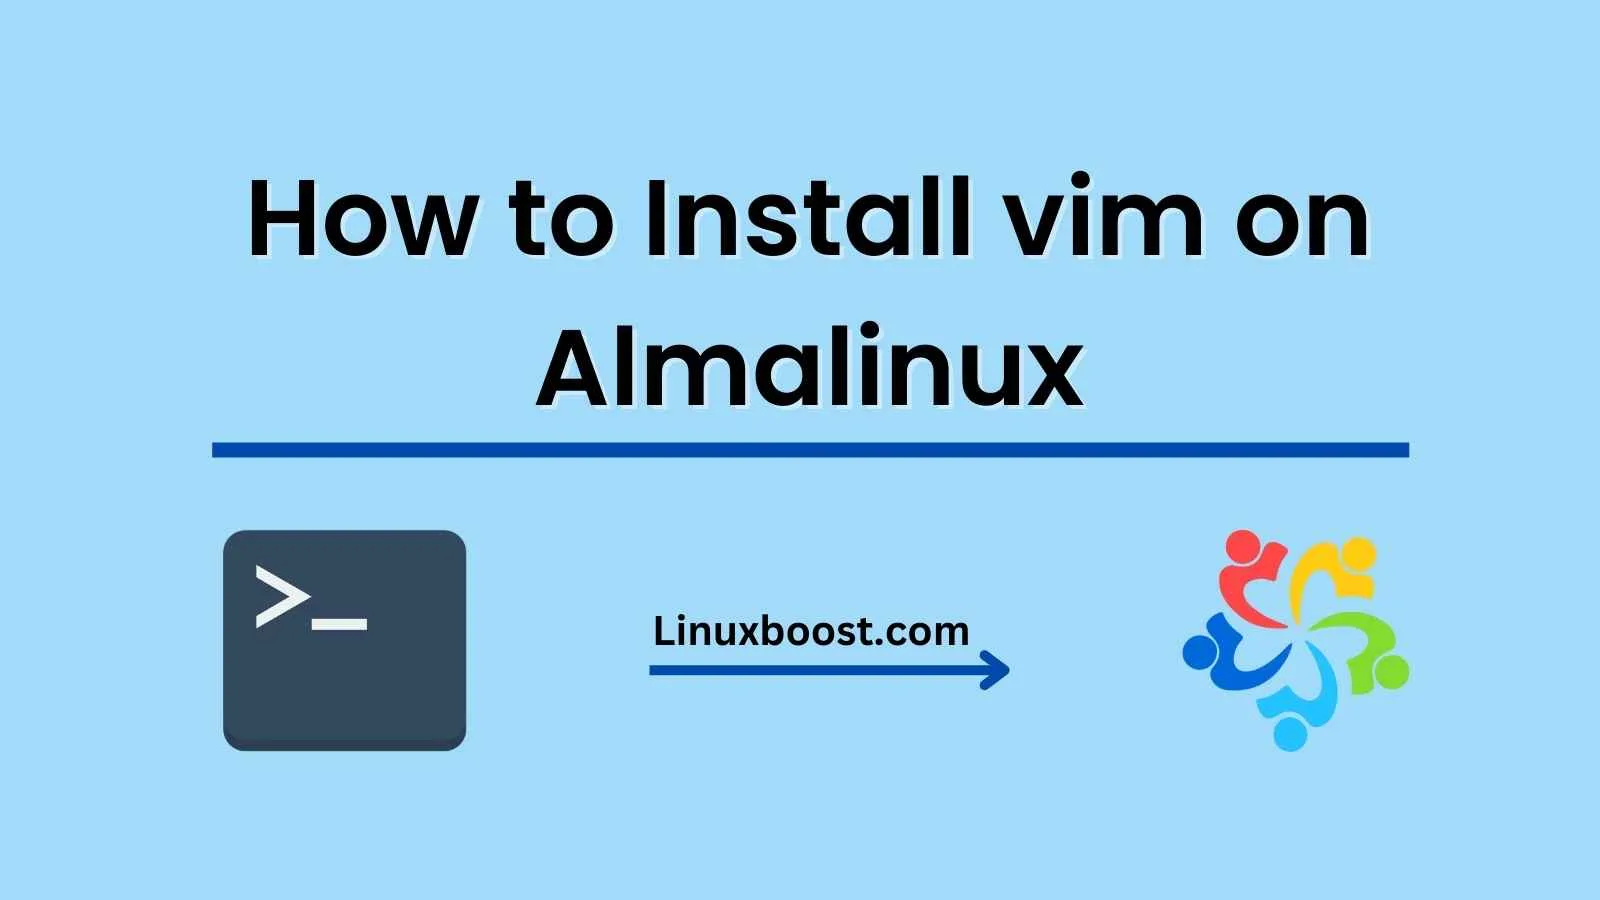 How to Install vim on Almalinux